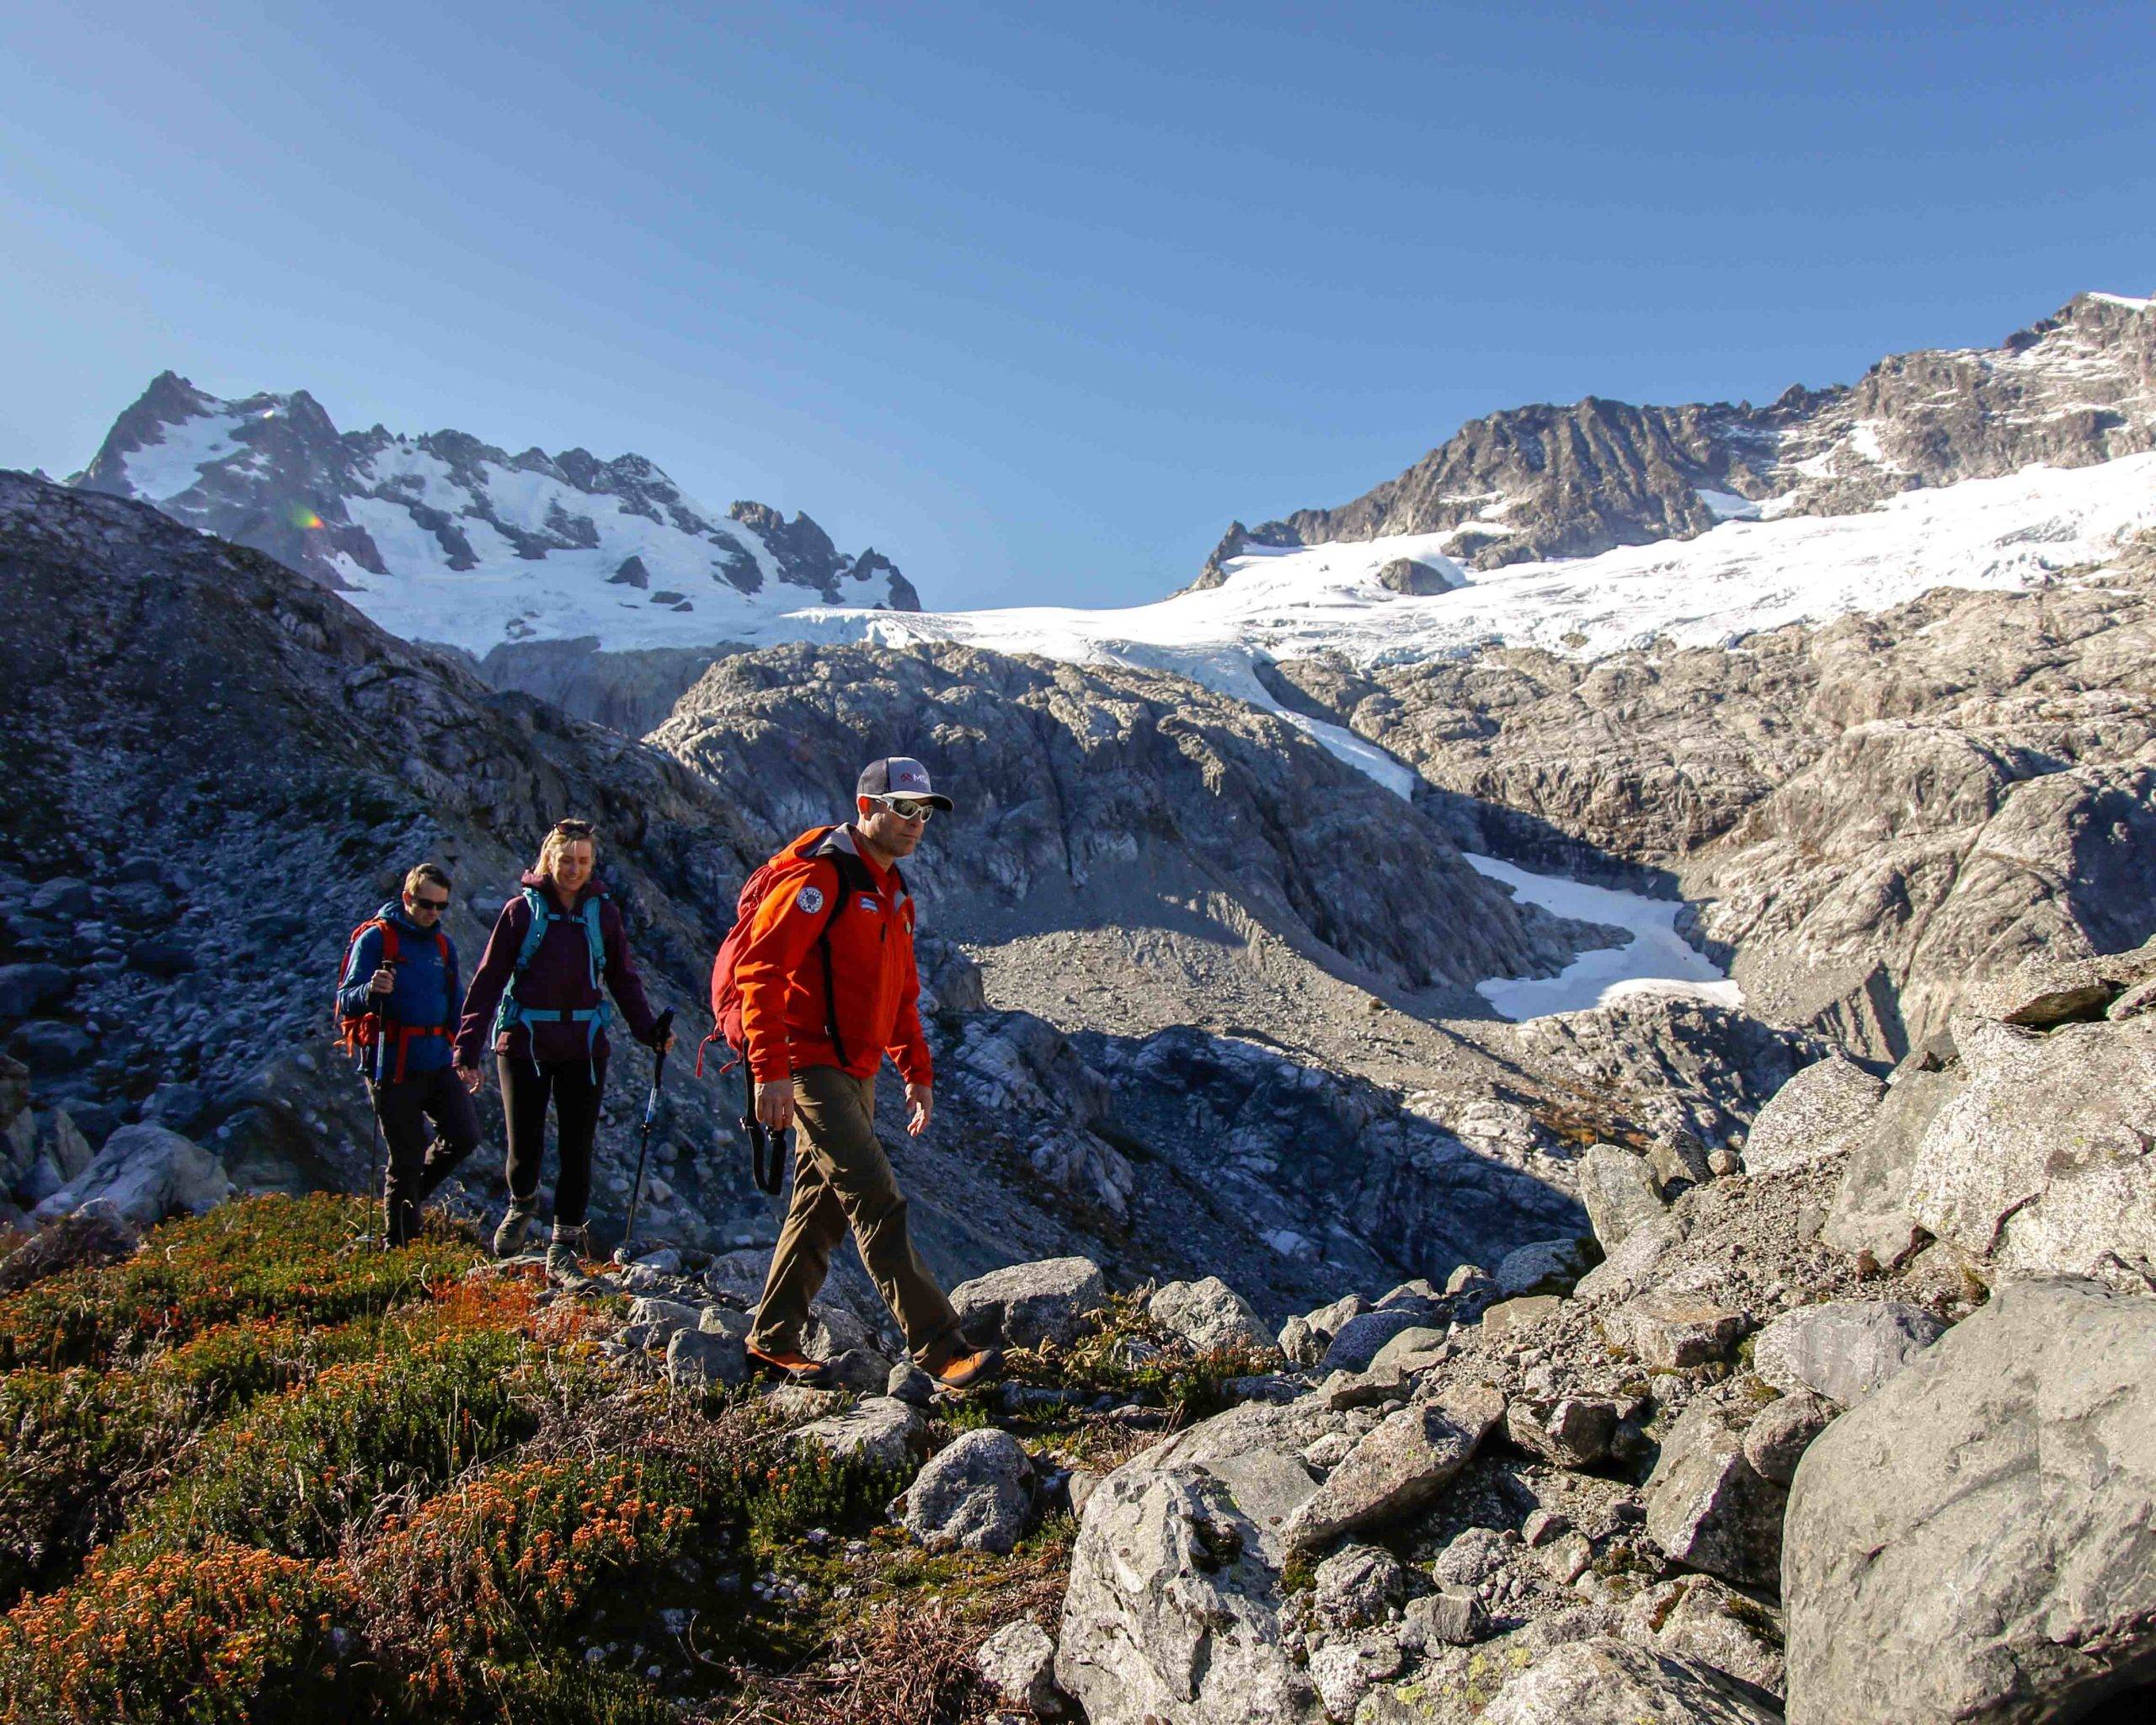 Wilderness Hiking - explore the wilderness british columbia has to offer